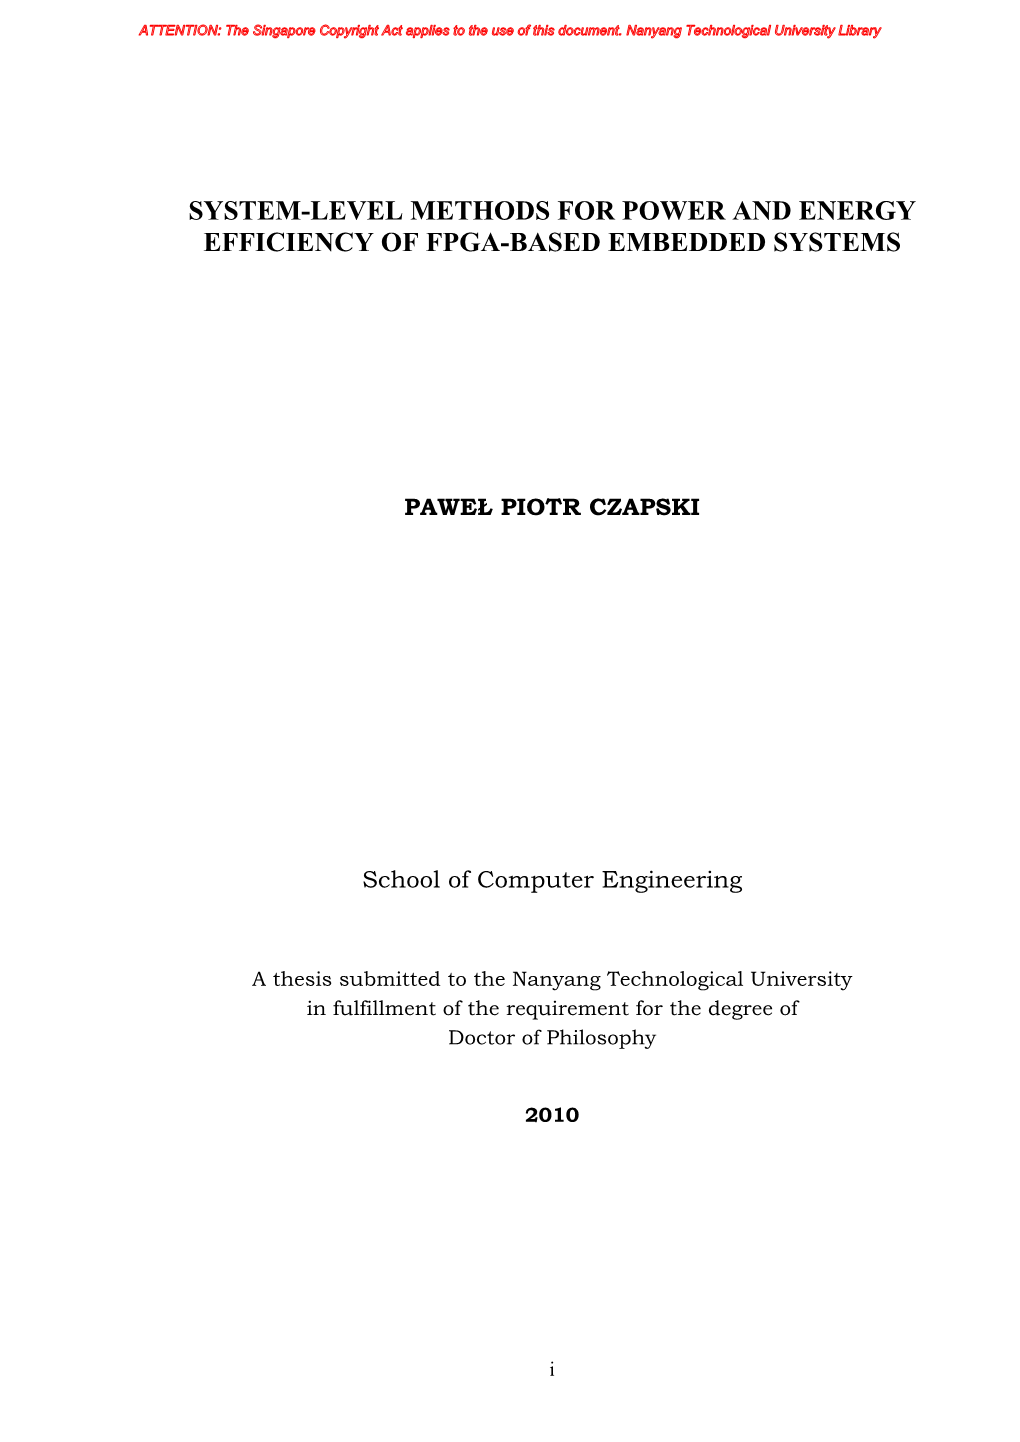 System-Level Methods for Power and Energy Efficiency of Fpga-Based Embedded Systems